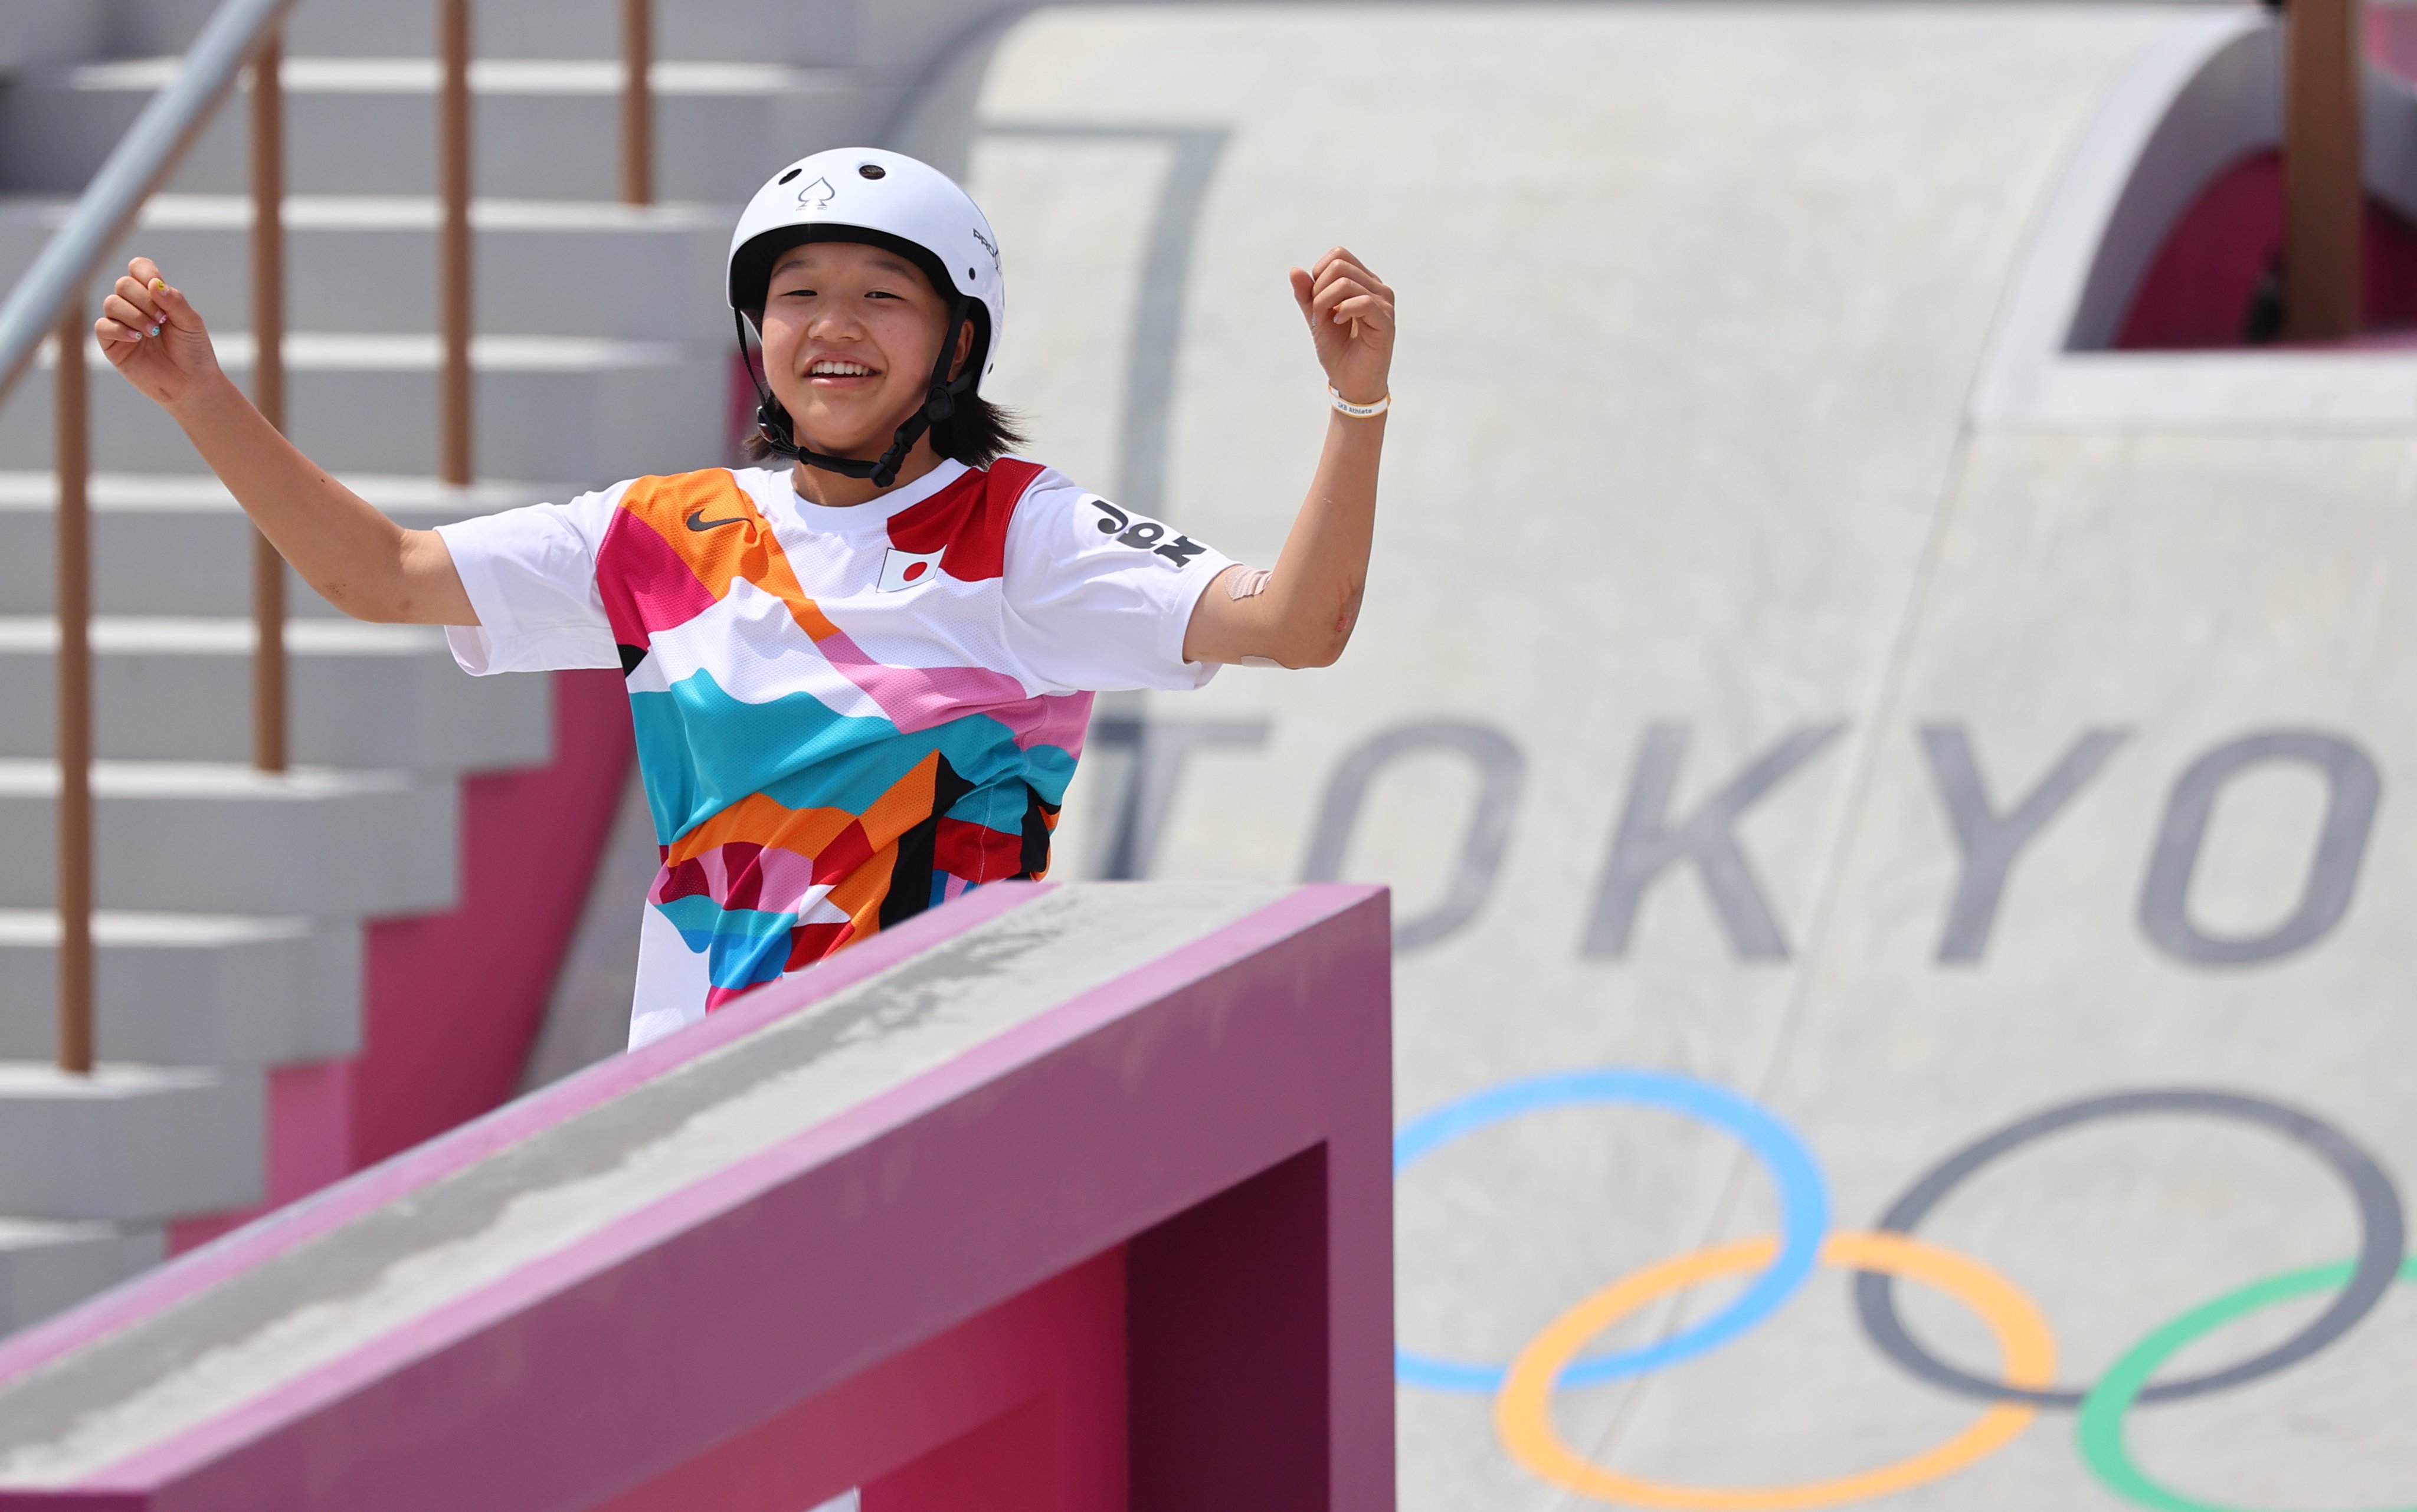 Morgenøvelser Aftensmad Magnetisk Standard Sport on Twitter: "Olympic champion at 13 YEARS OLD. Momiji  Nishiya takes #GOLD in the women's street skateboarding. The #silver went  to Rayssa Leal, who is also 13 years old. LIVE: